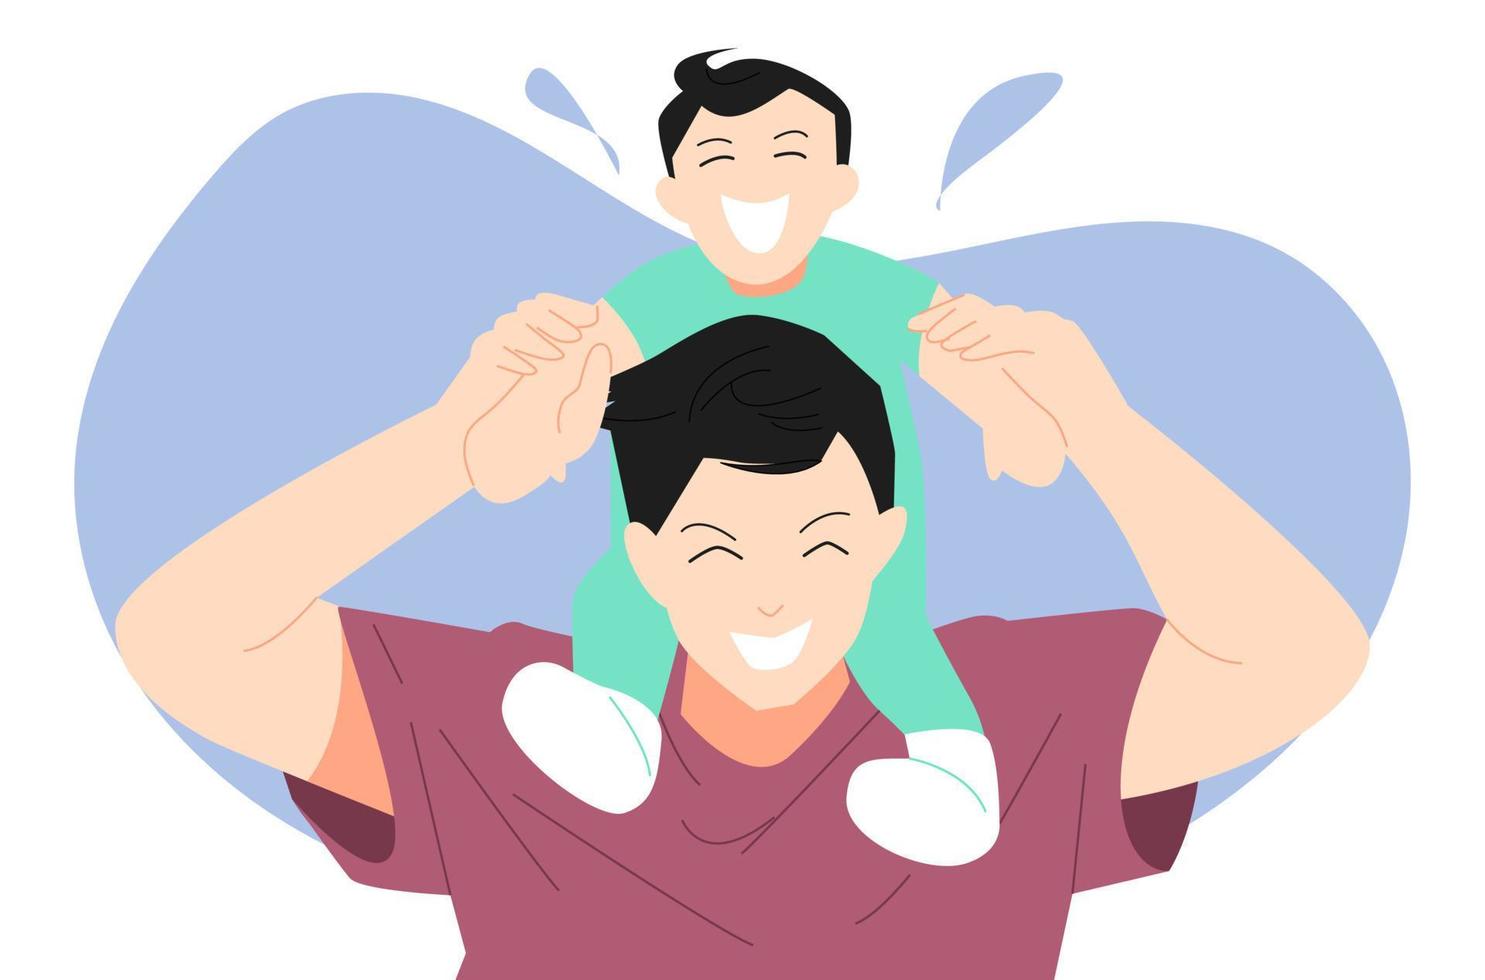 father holding son with happy expression, laughing together. suitable for family theme, parent, child, father's day, childhood, etc. flat vector illustration